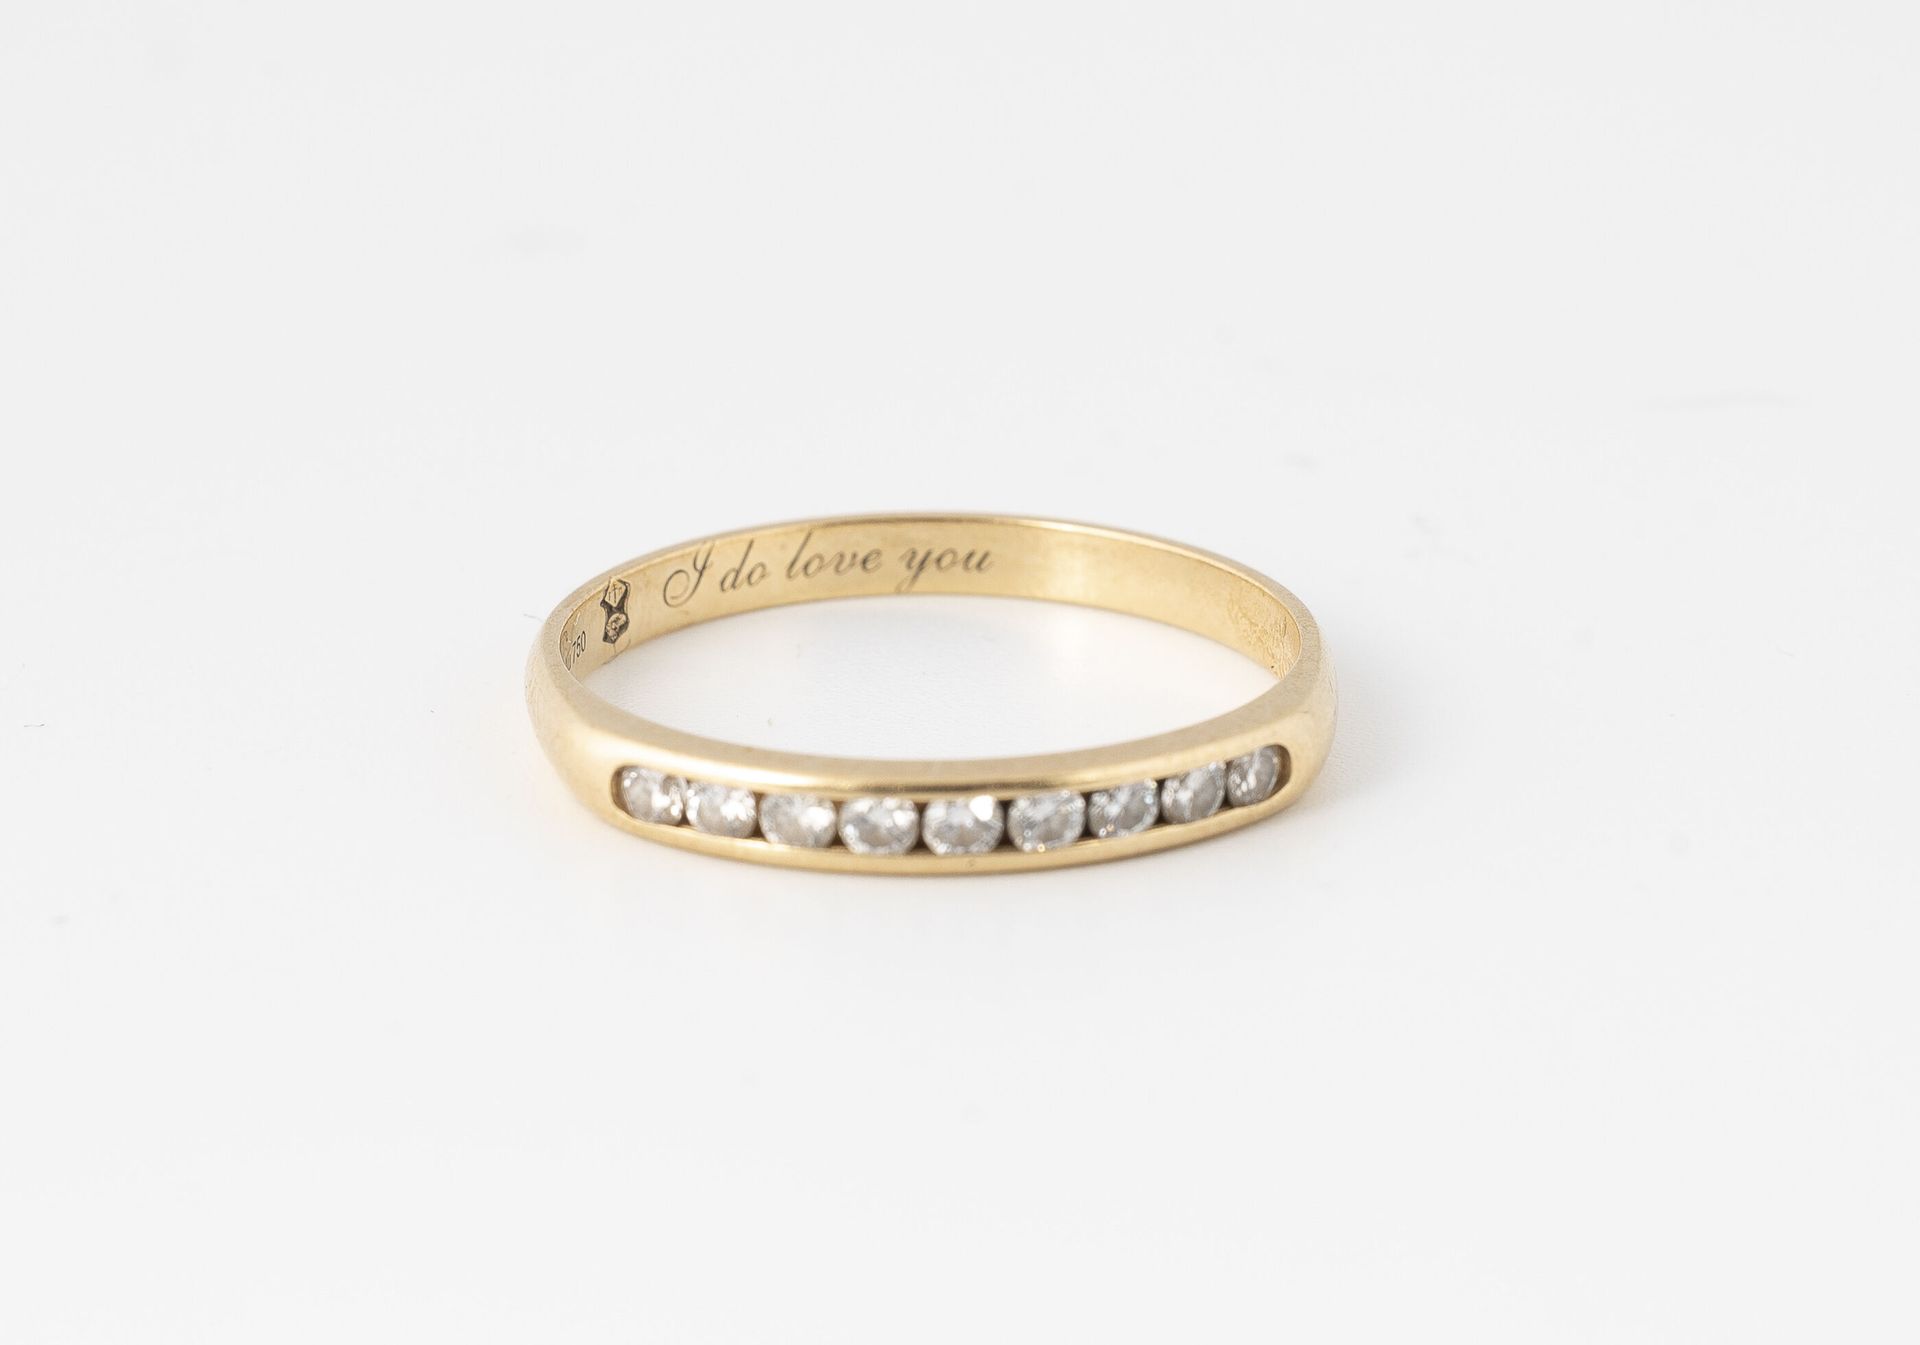 GUERIN Fine wedding band in yellow gold (750) centered by a line of brilliant-cu&hellip;